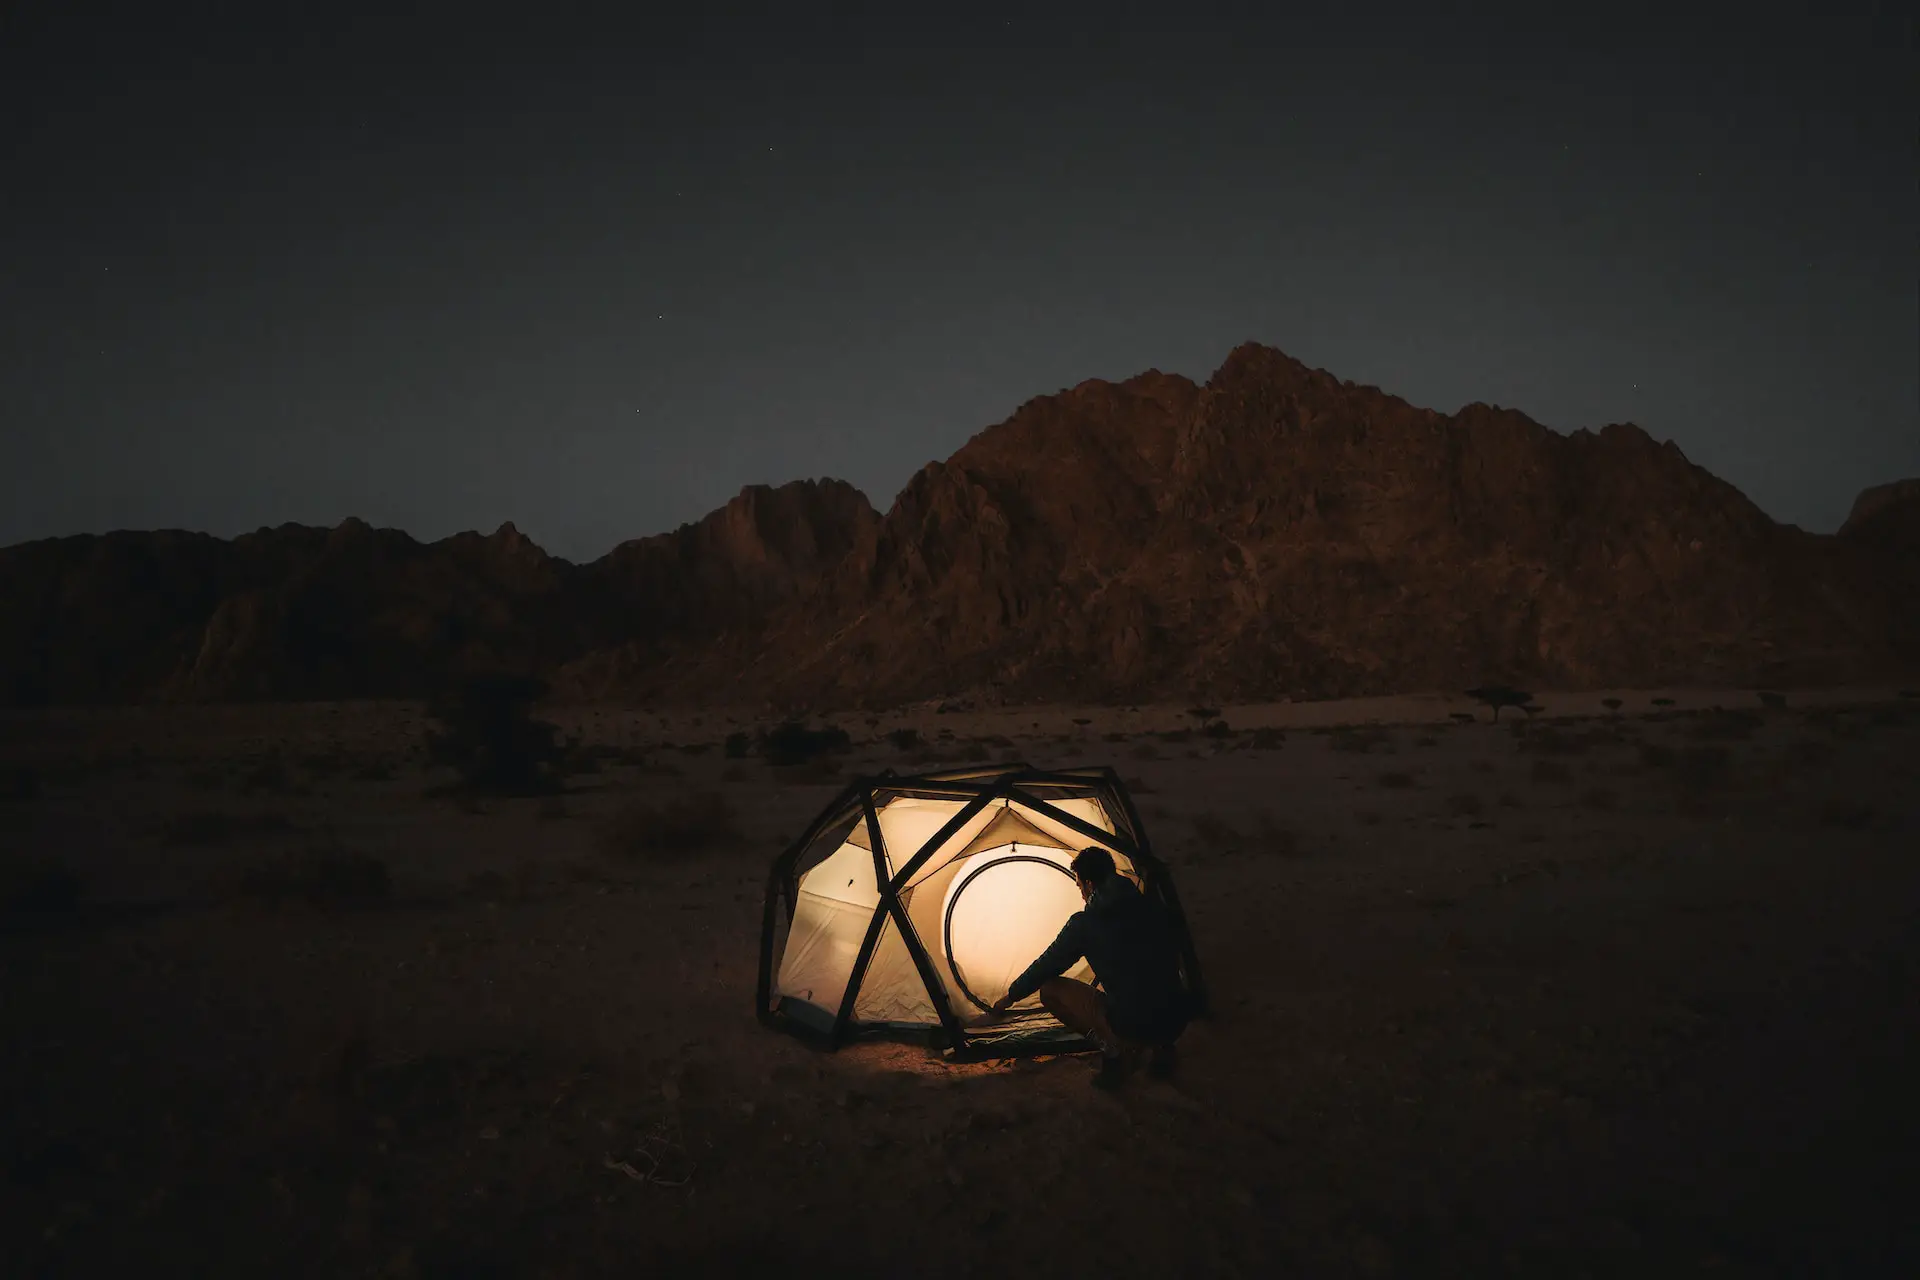 silhouette of a person alone in a tent at night